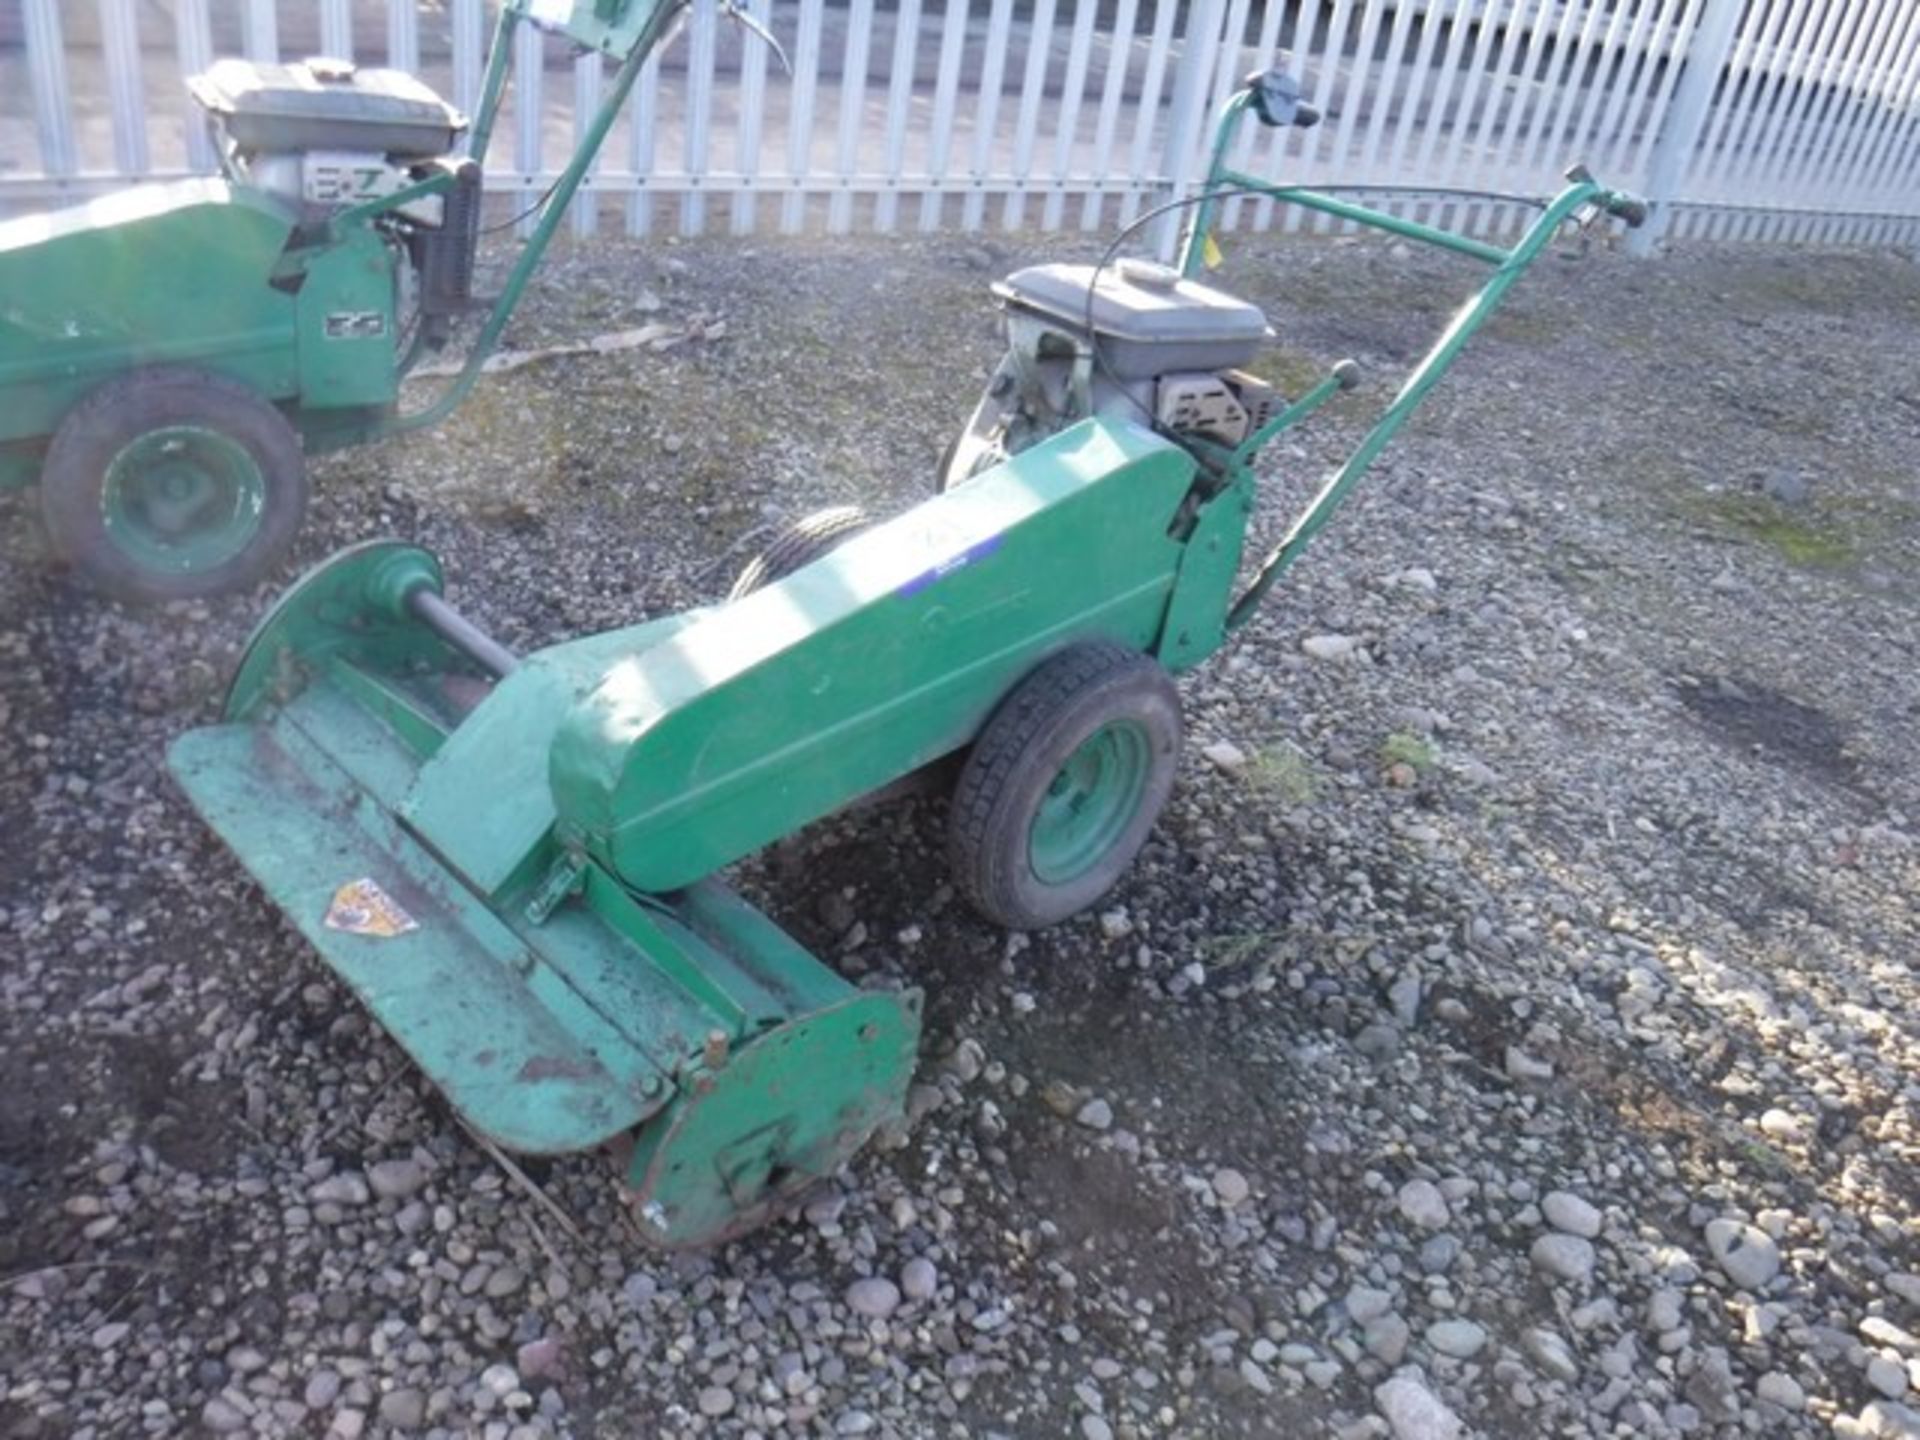 RANSOMES reelcutter with Kubota 8hp engine.